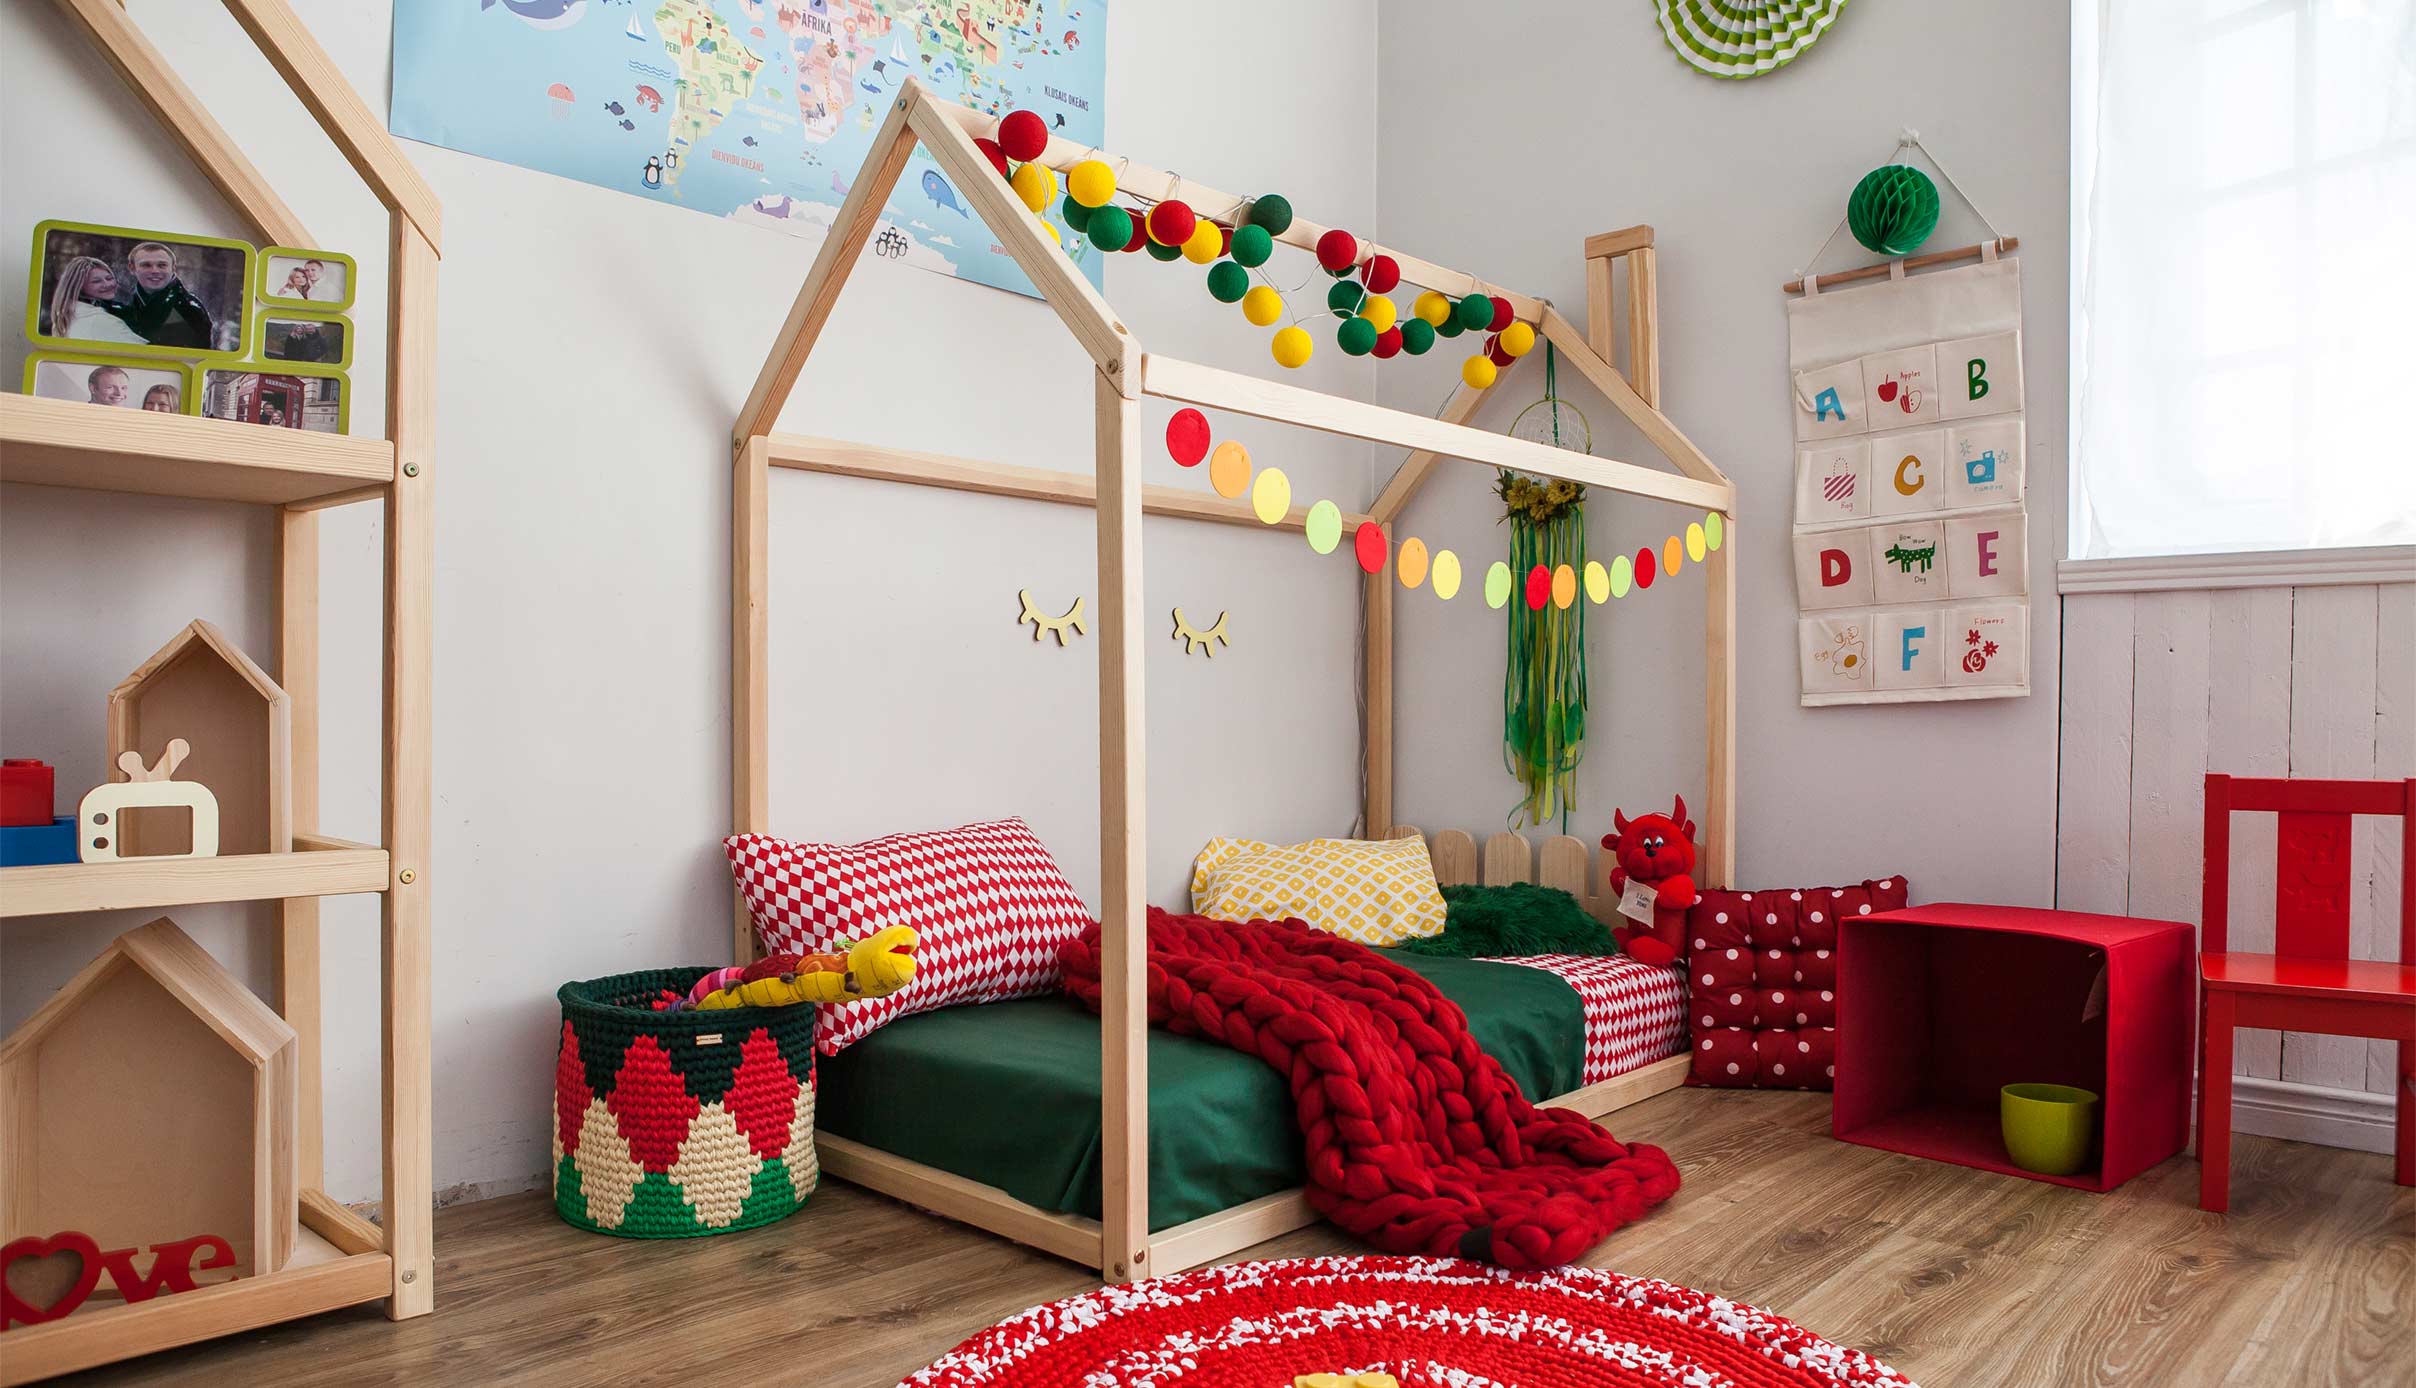 A children's room with a bed, toys and decorations.